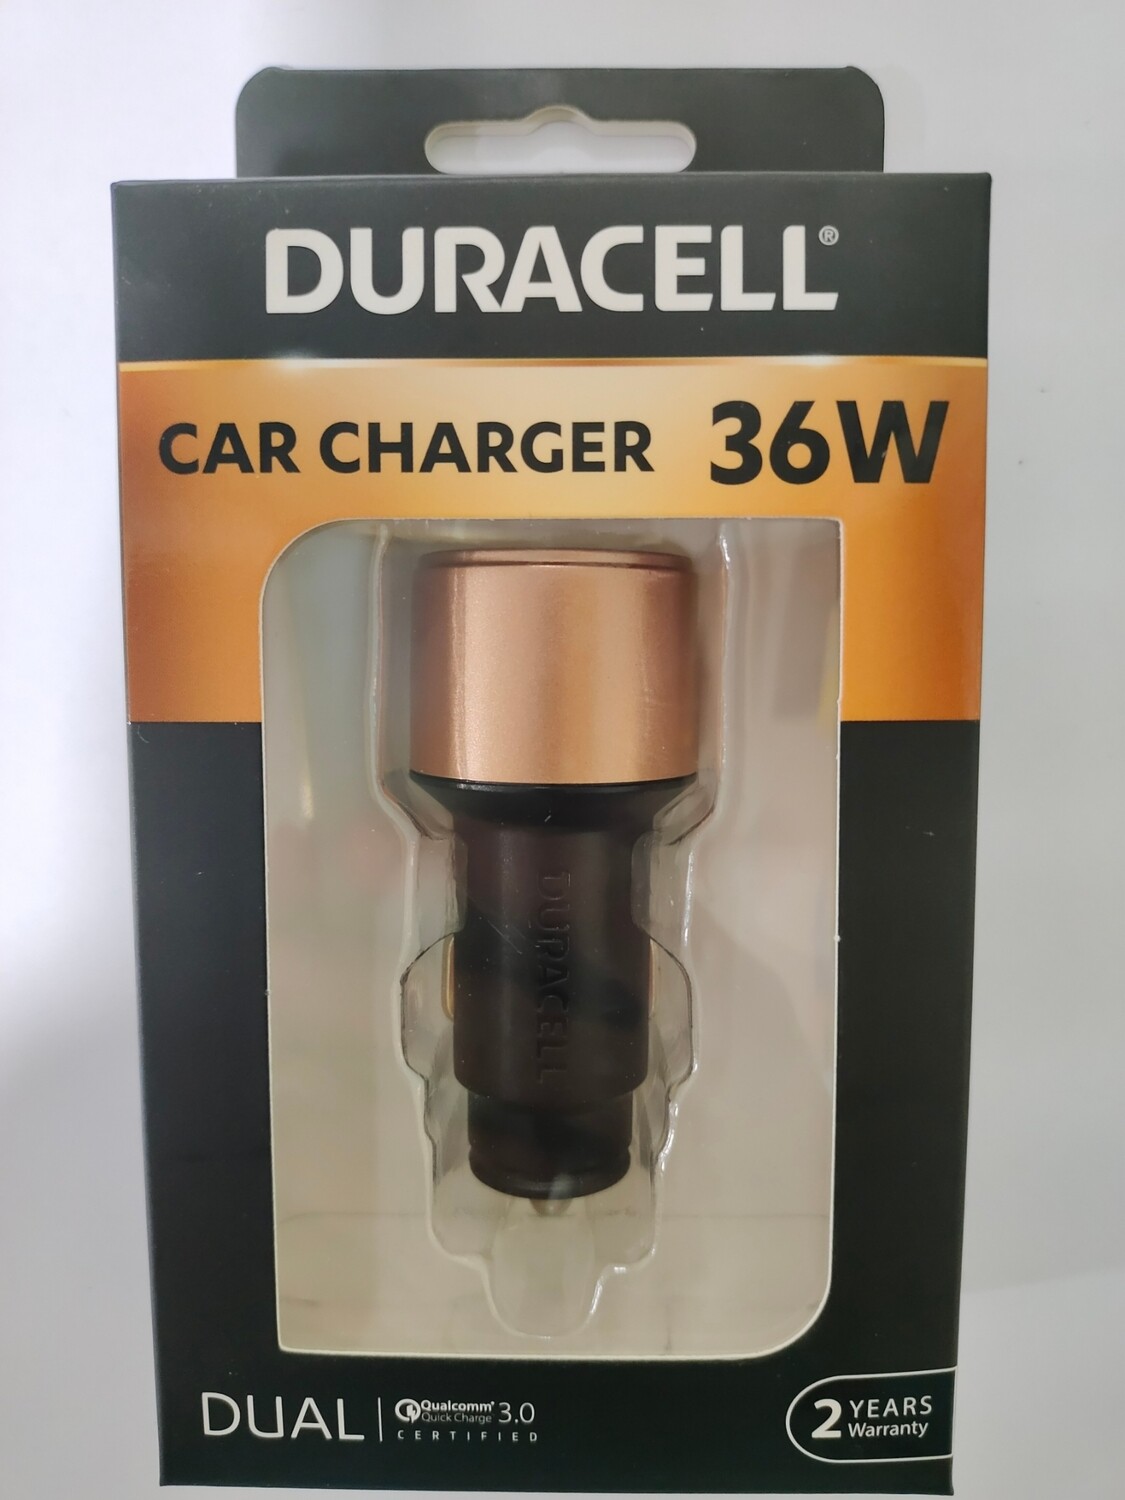 Duracell 36W Fast Car Charger Adapter